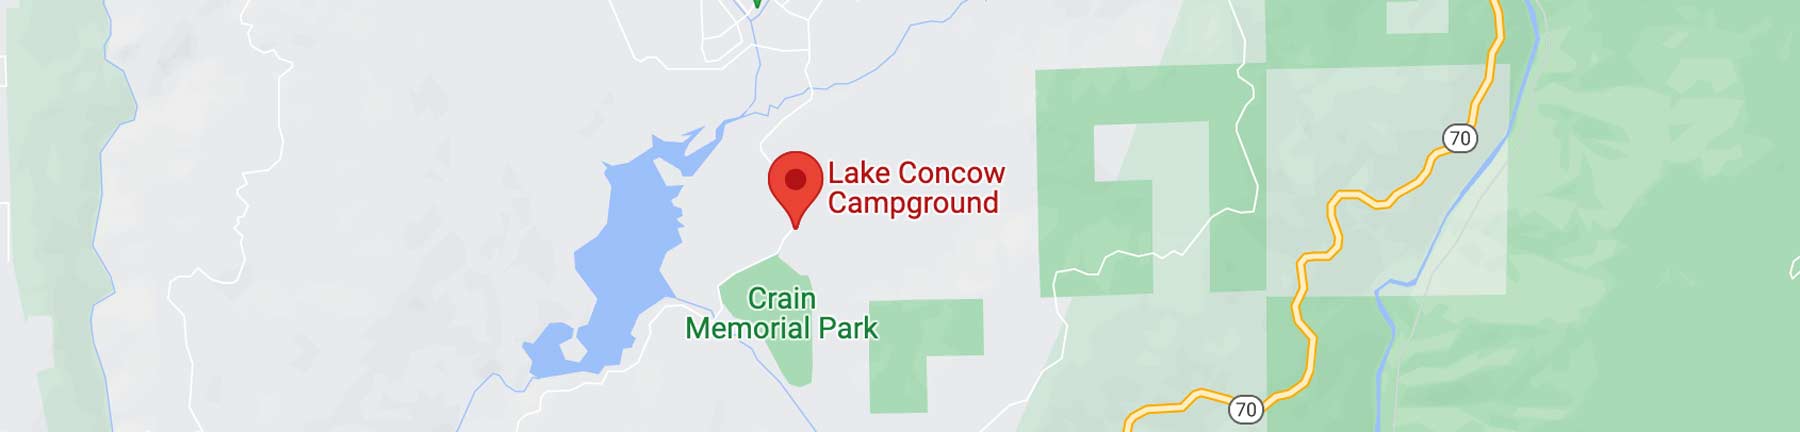 Lake Concow Campground